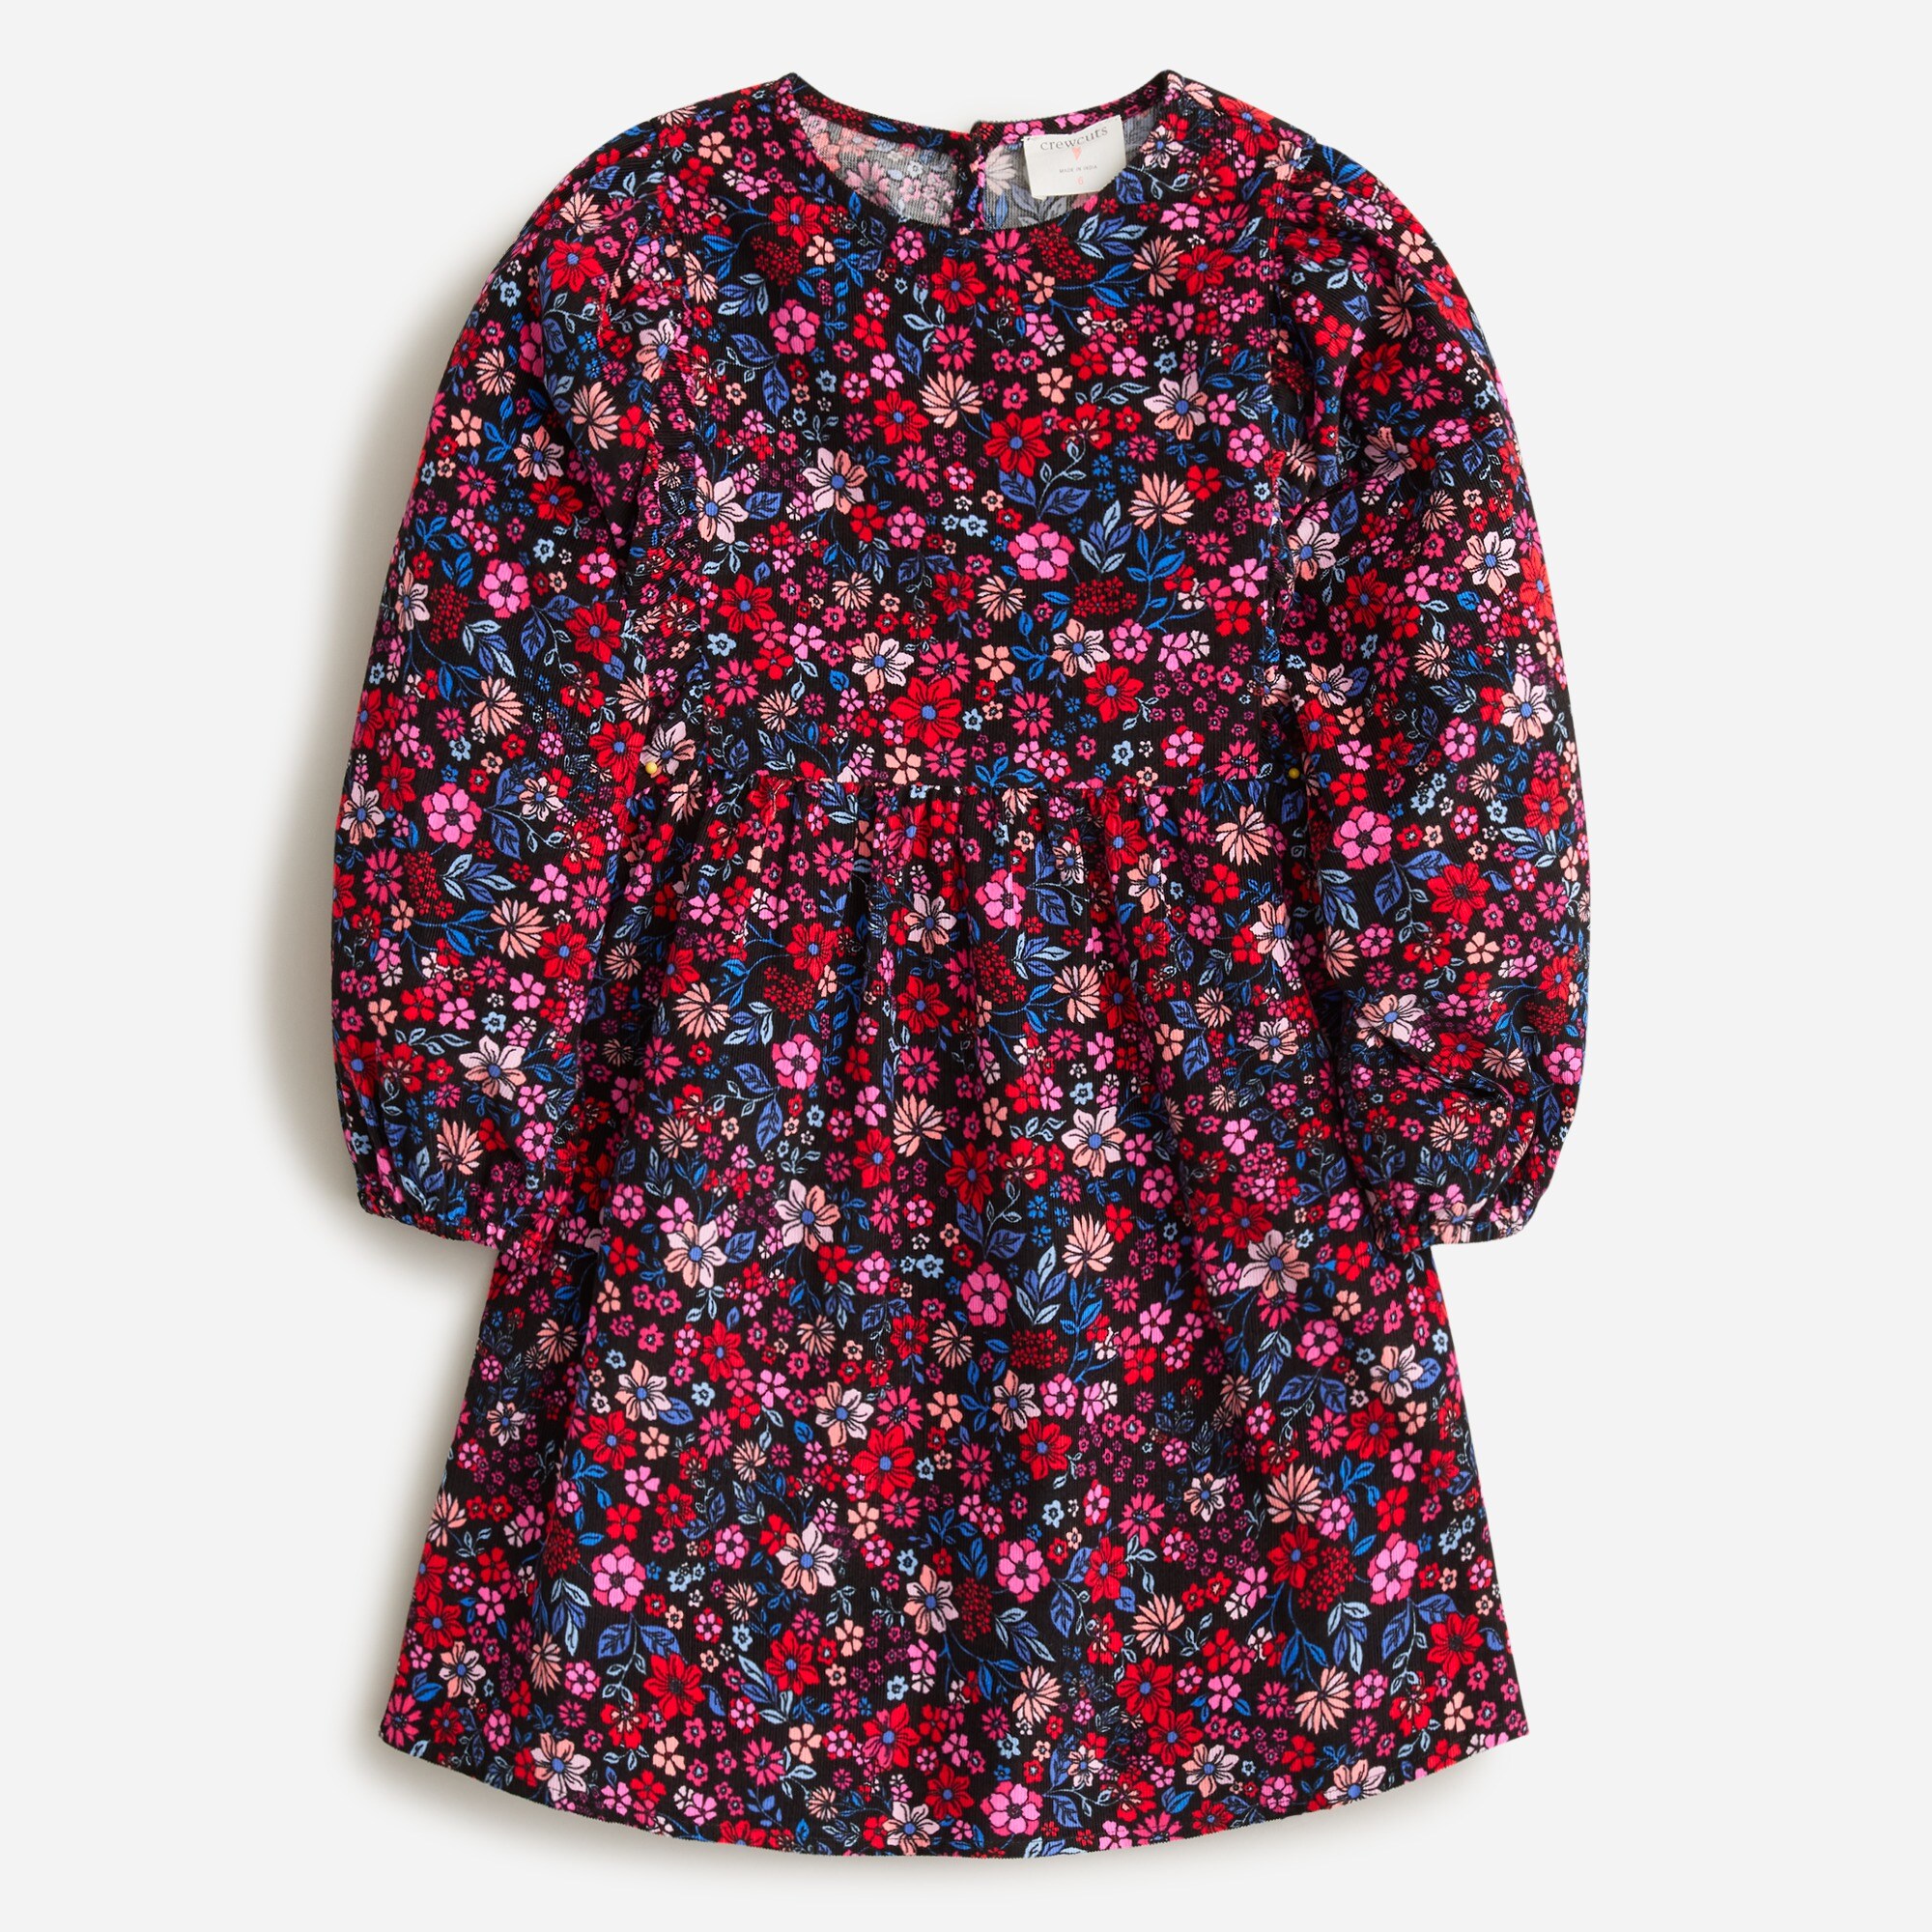  Girls' puff-sleeve dress in floral corduroy